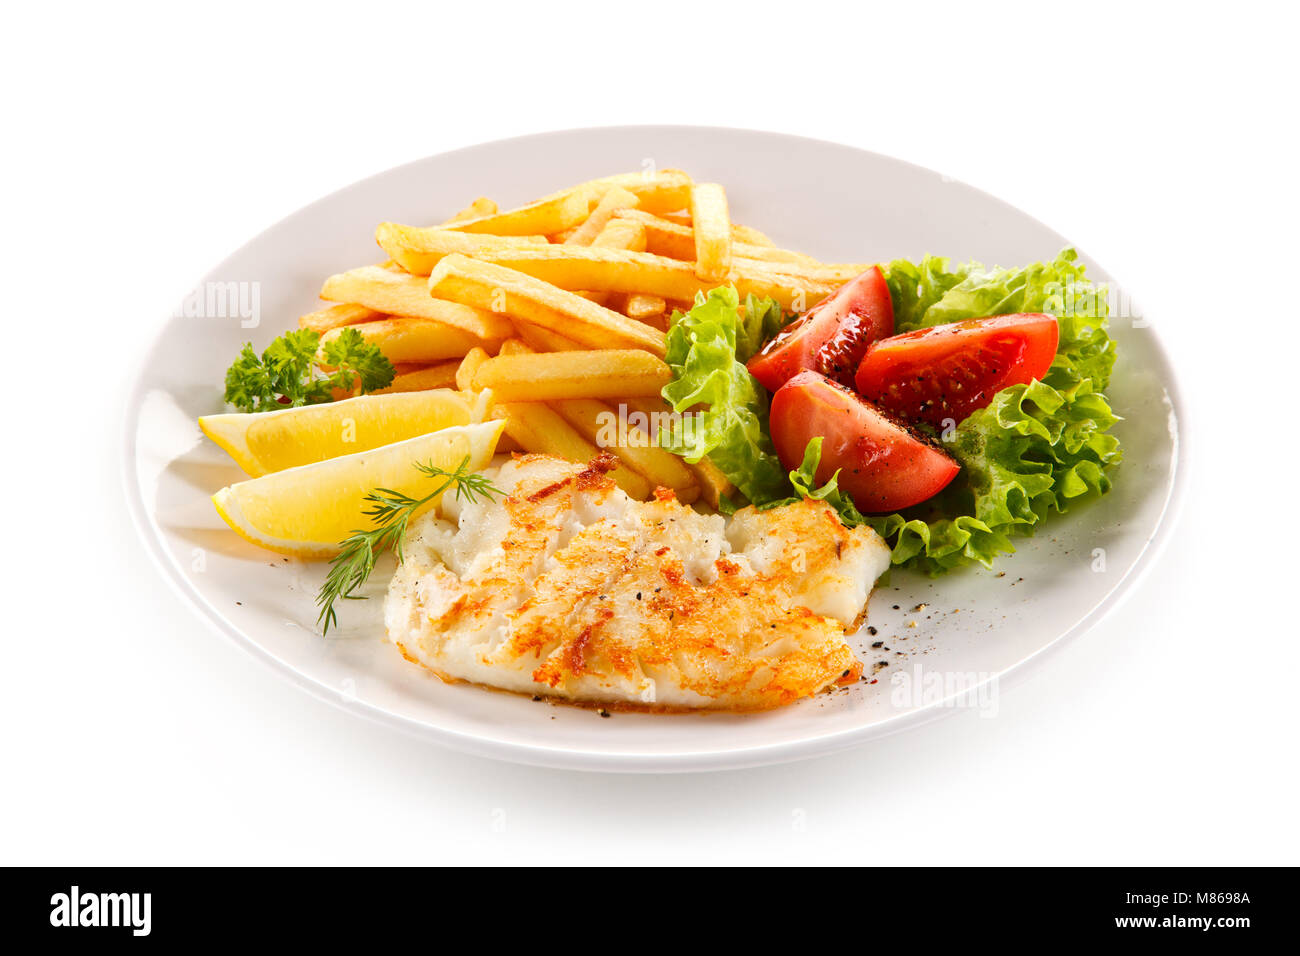 Fried fish fillet with french fries on white background Stock Photo